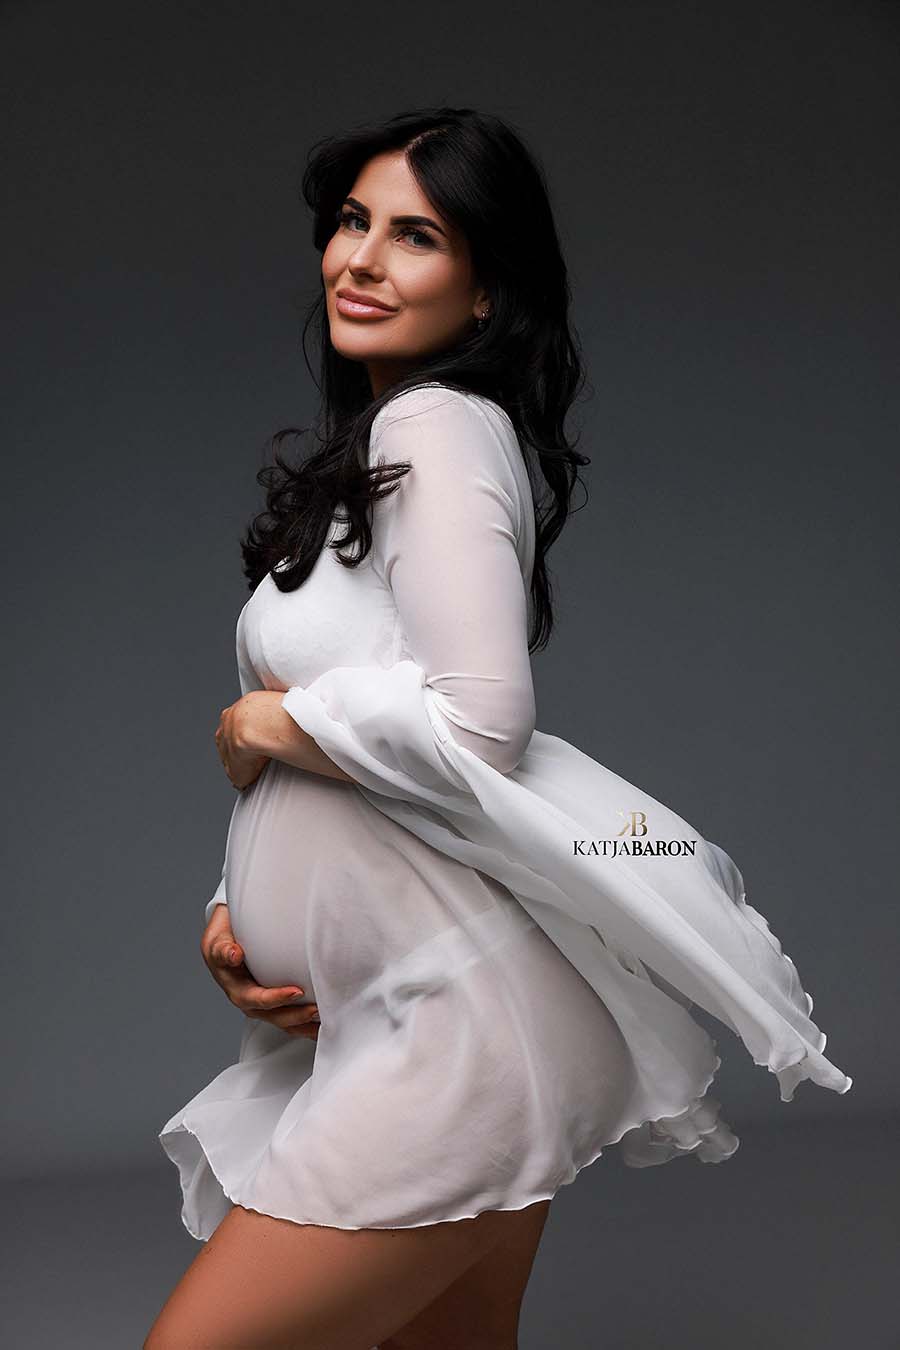 A model with  long black hair is posing for the camera. She is wearing a short white dress. The dress has a light chiffon fabric and is waving in the wind. She is pregnant and is posing with her hands around her belly. 